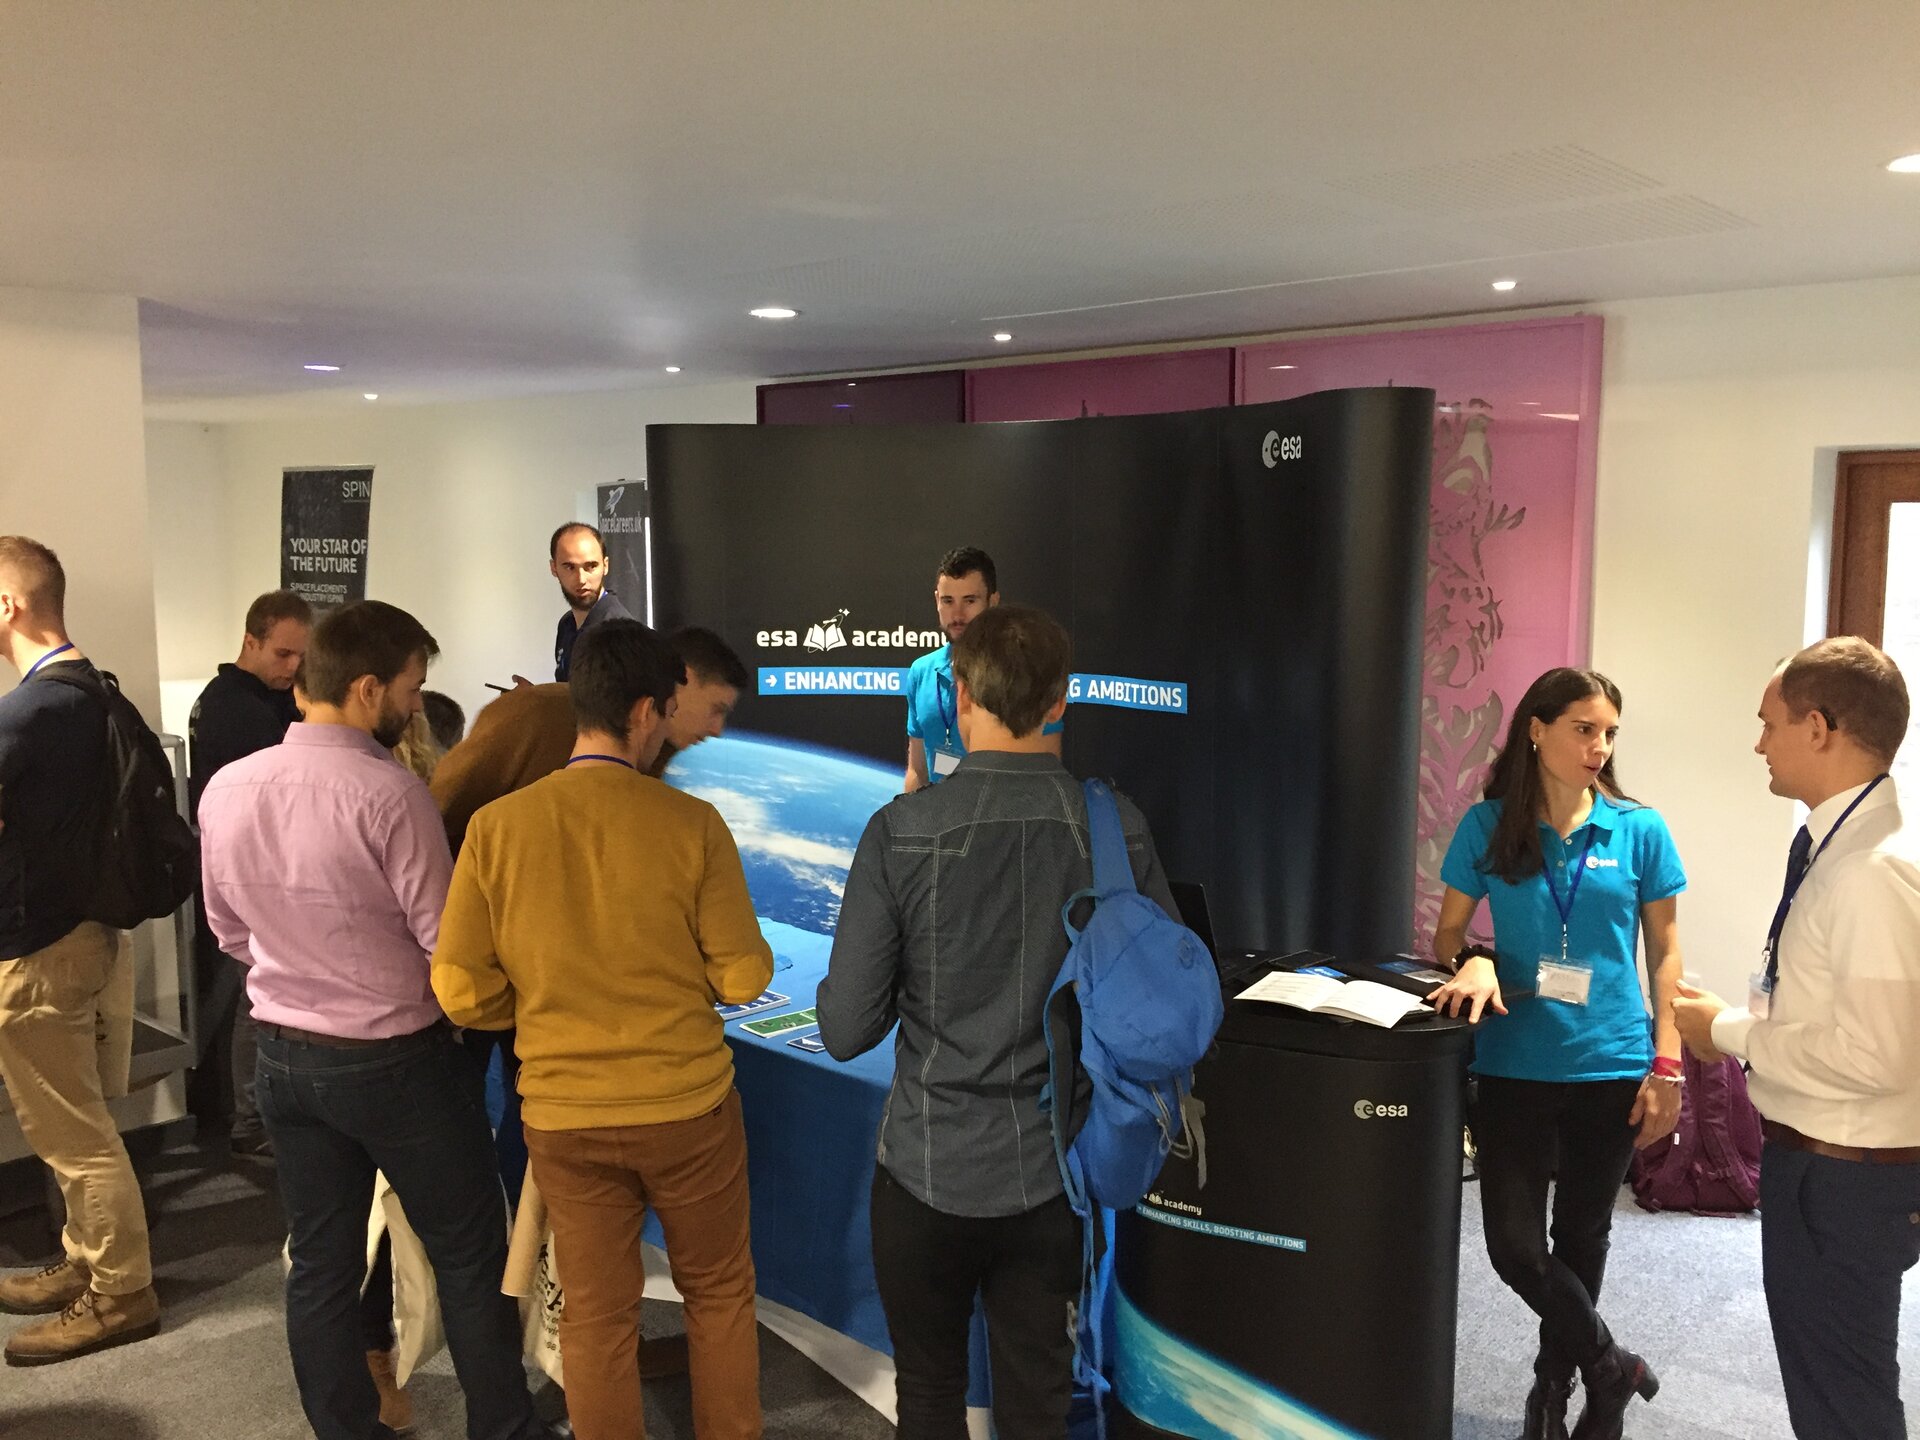 Conference attendees discussing at the ESA Education Office stand